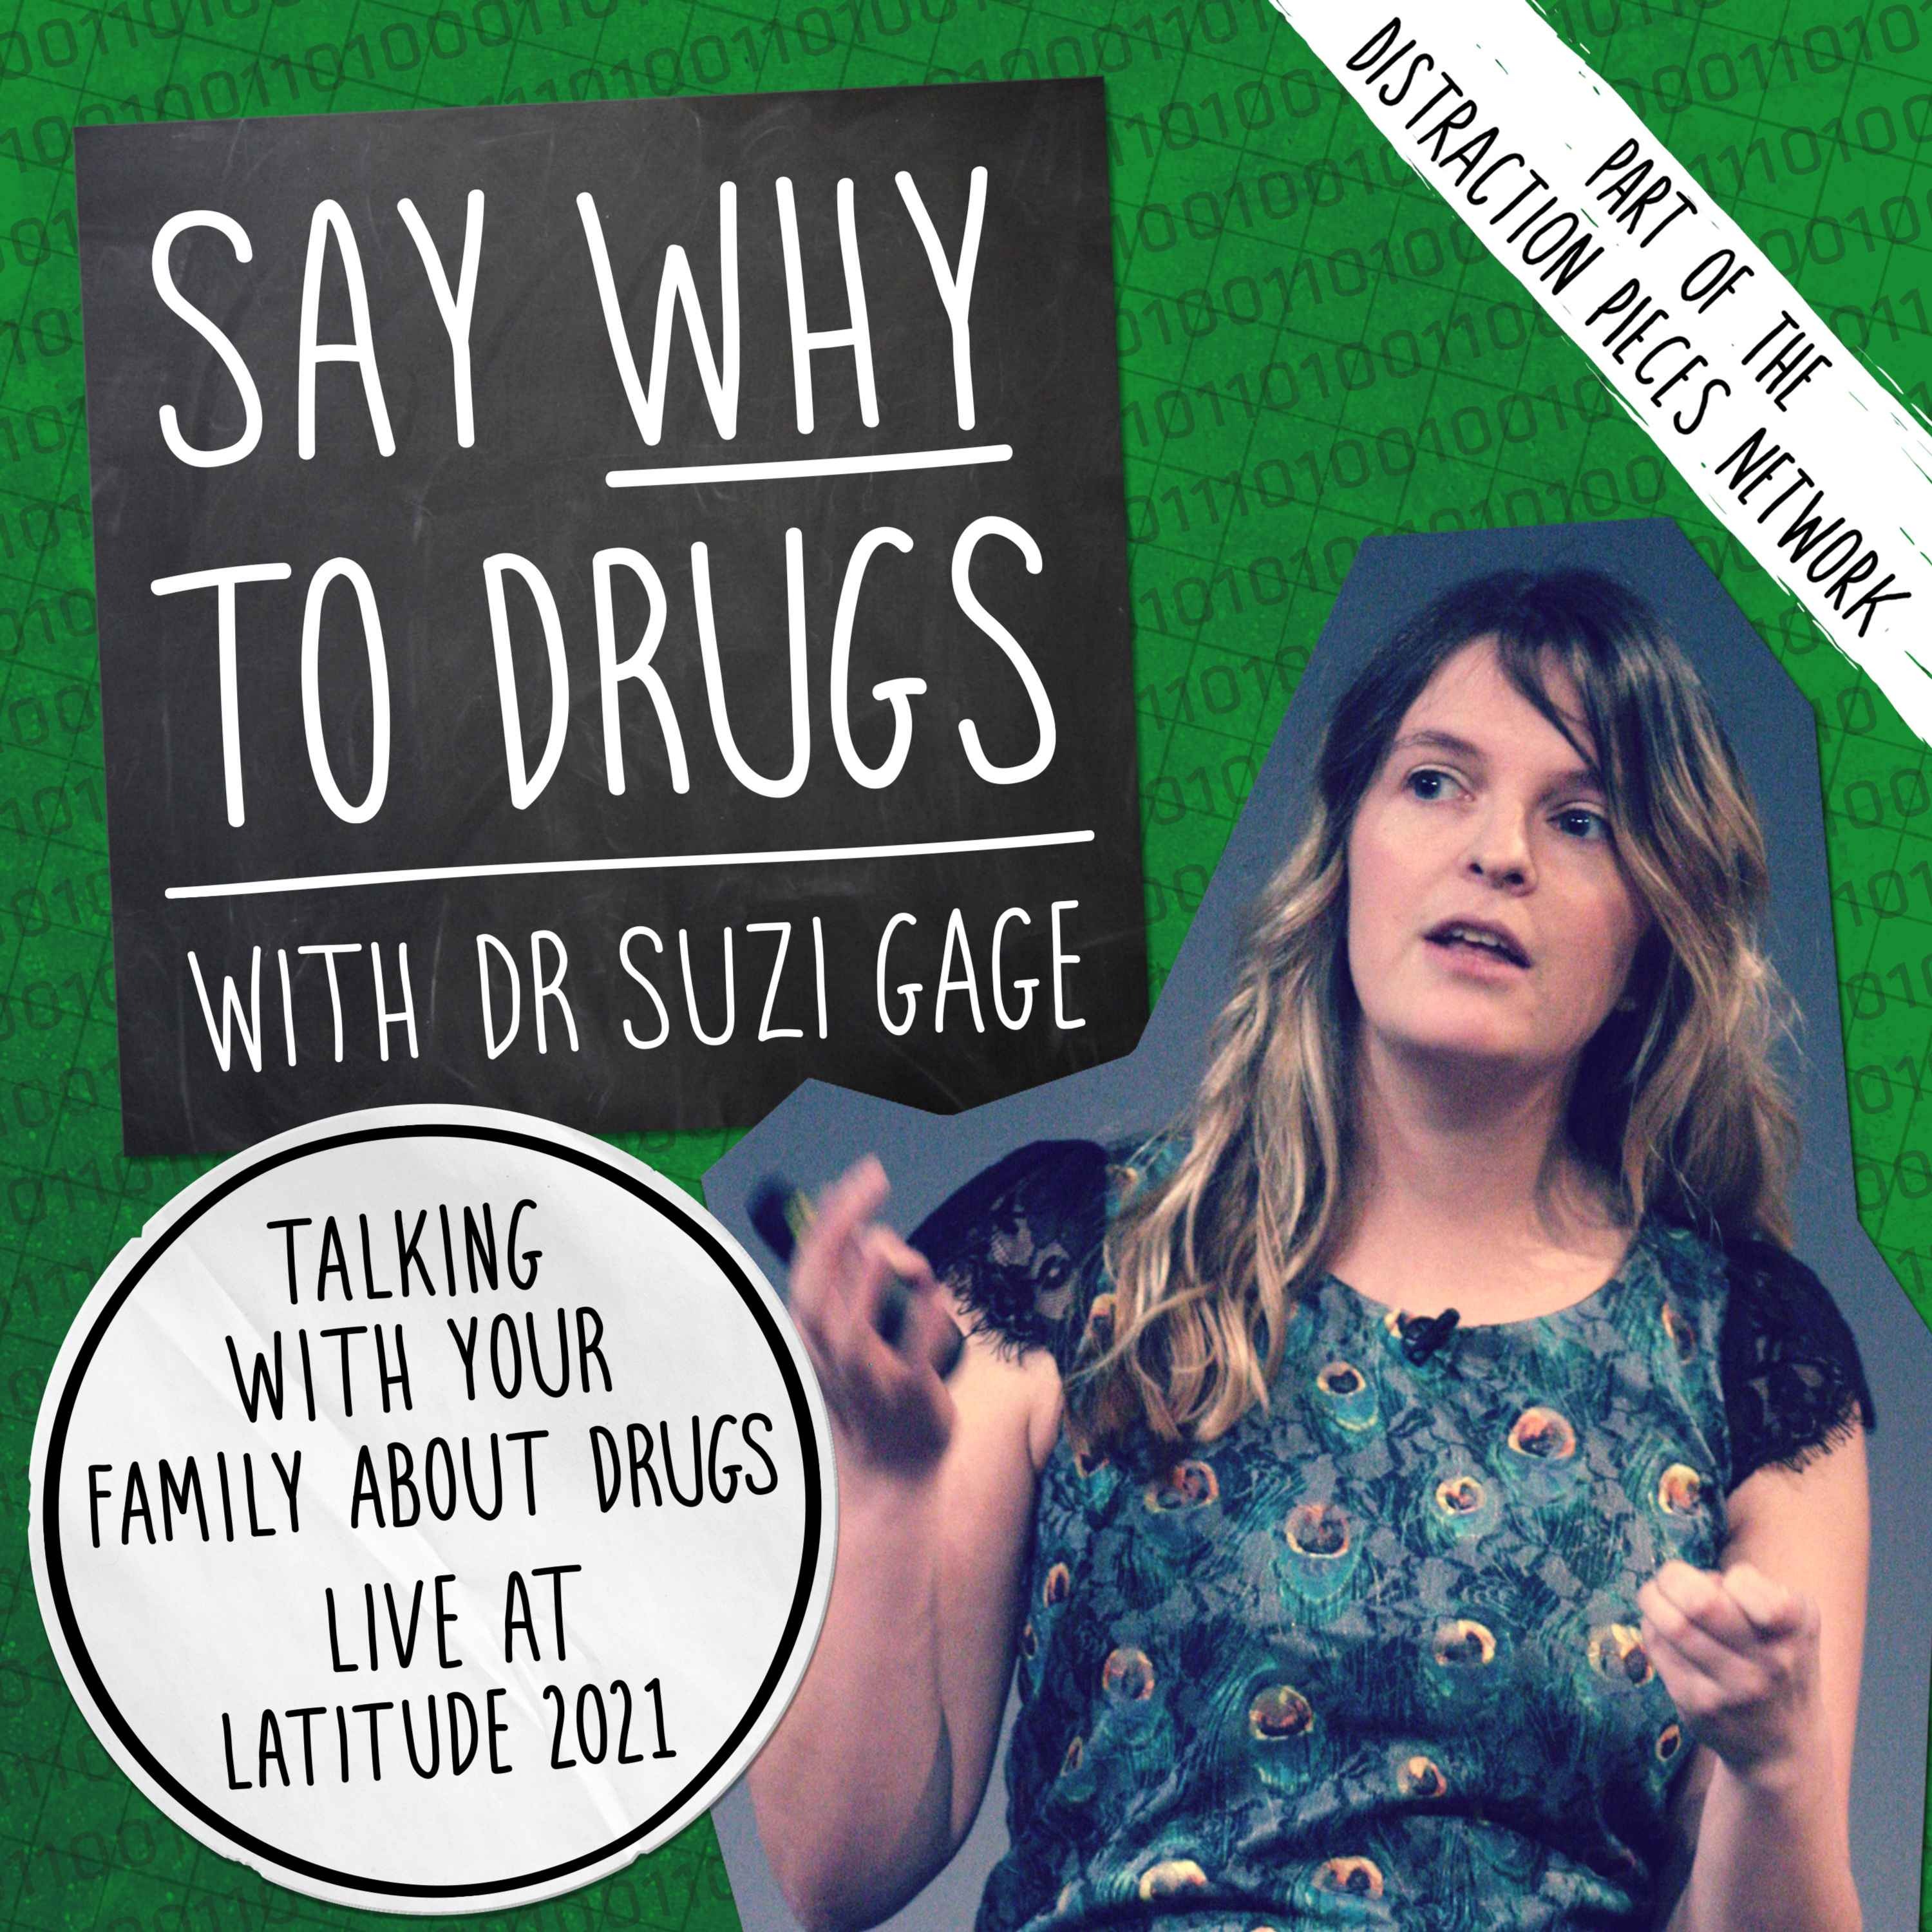 Talking with your family about drugs - Live at Latitude 2021